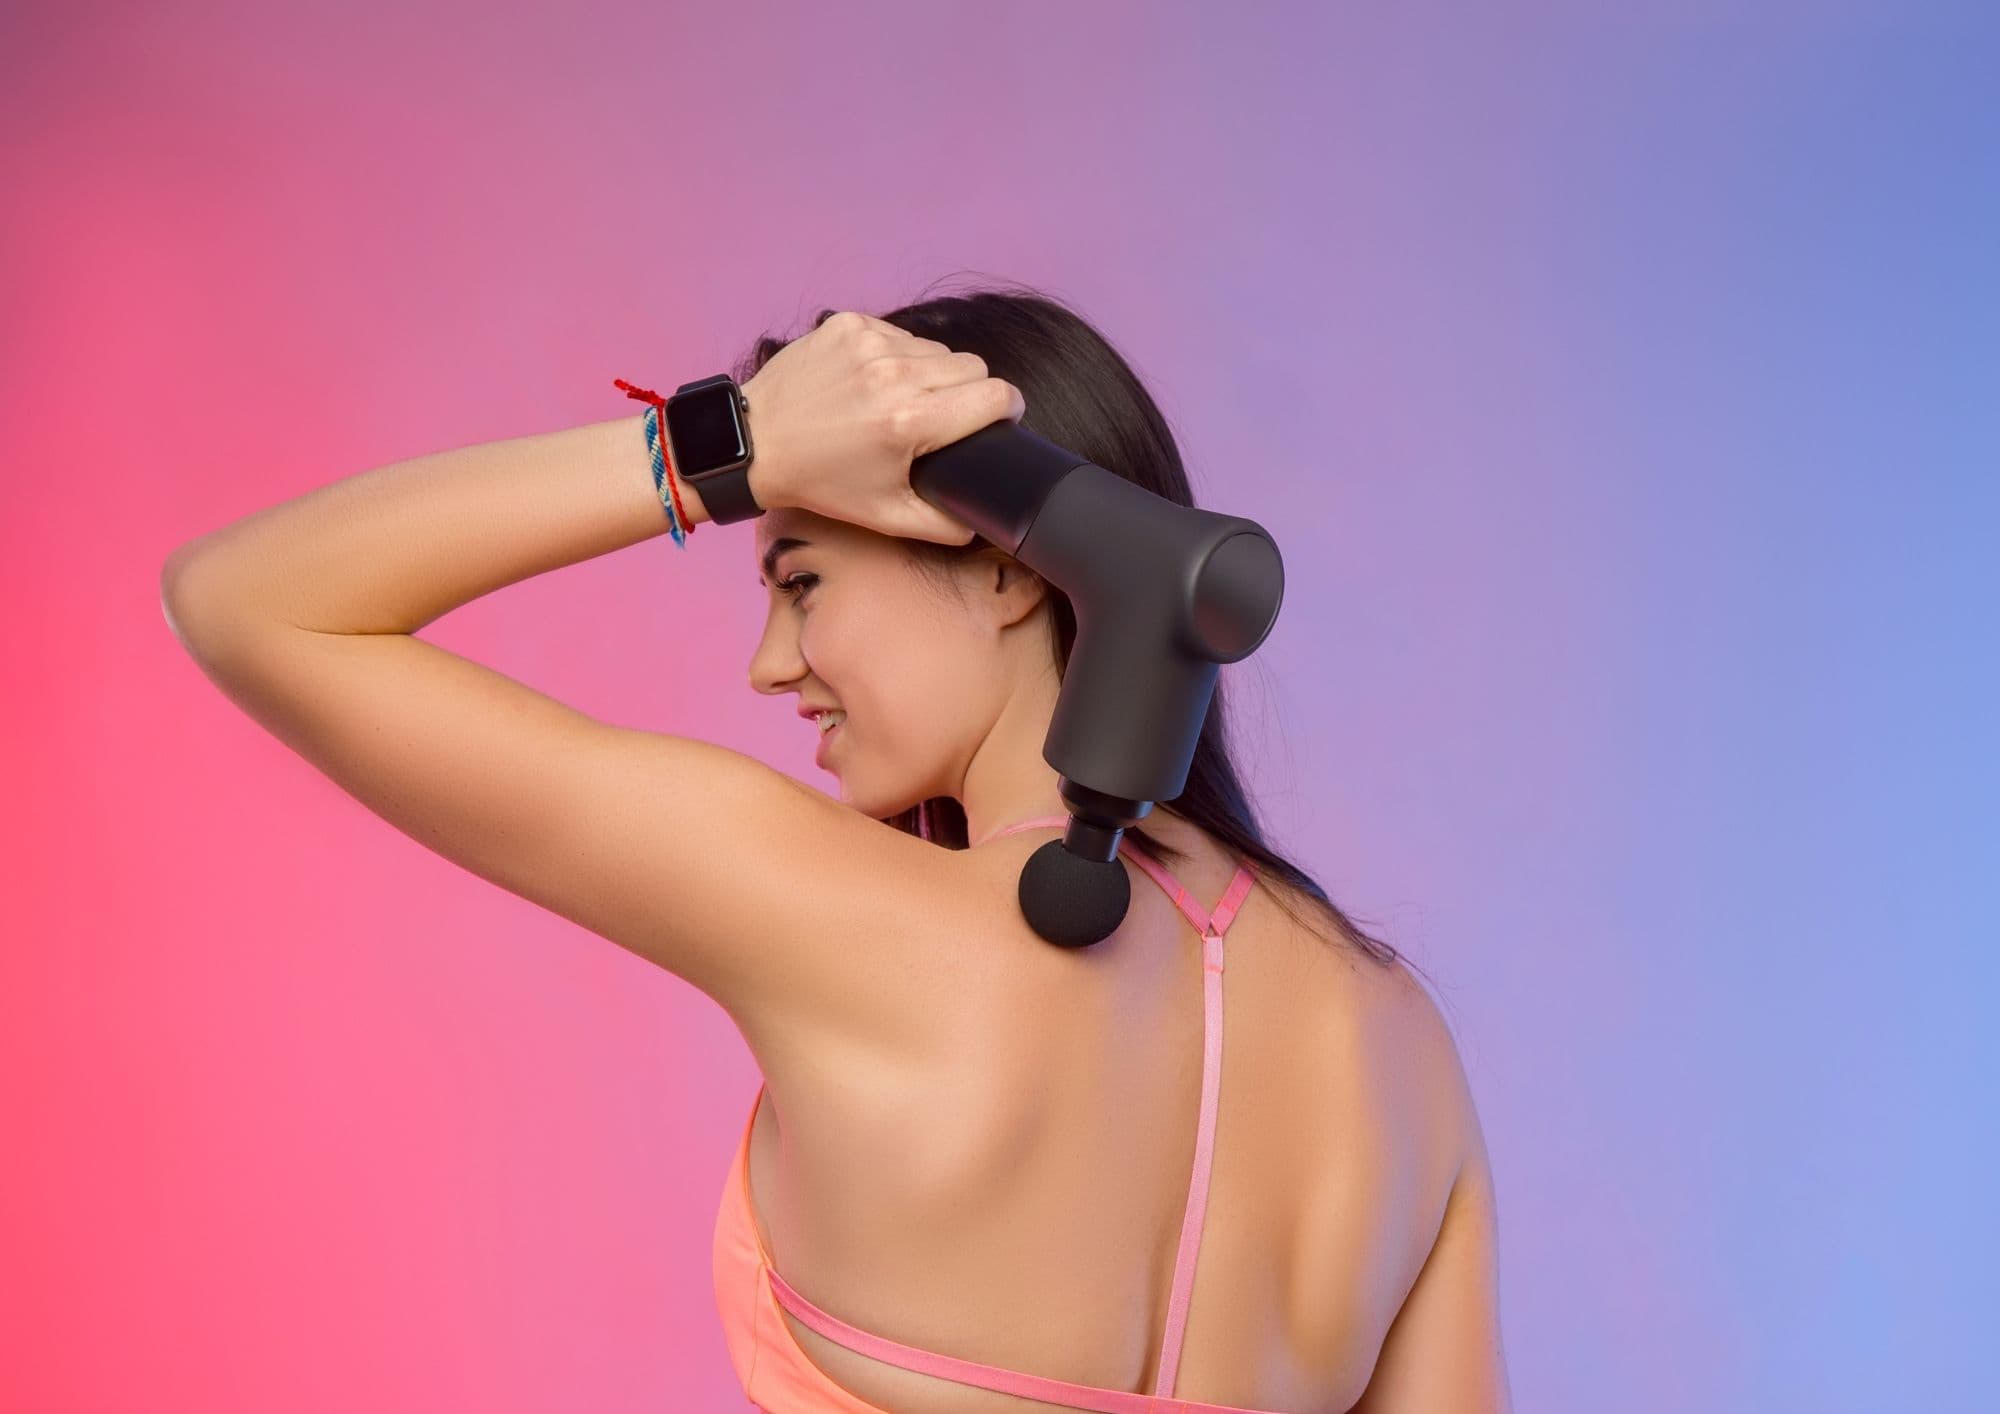 What Is A Massage Gun And Why Is It So Popular?